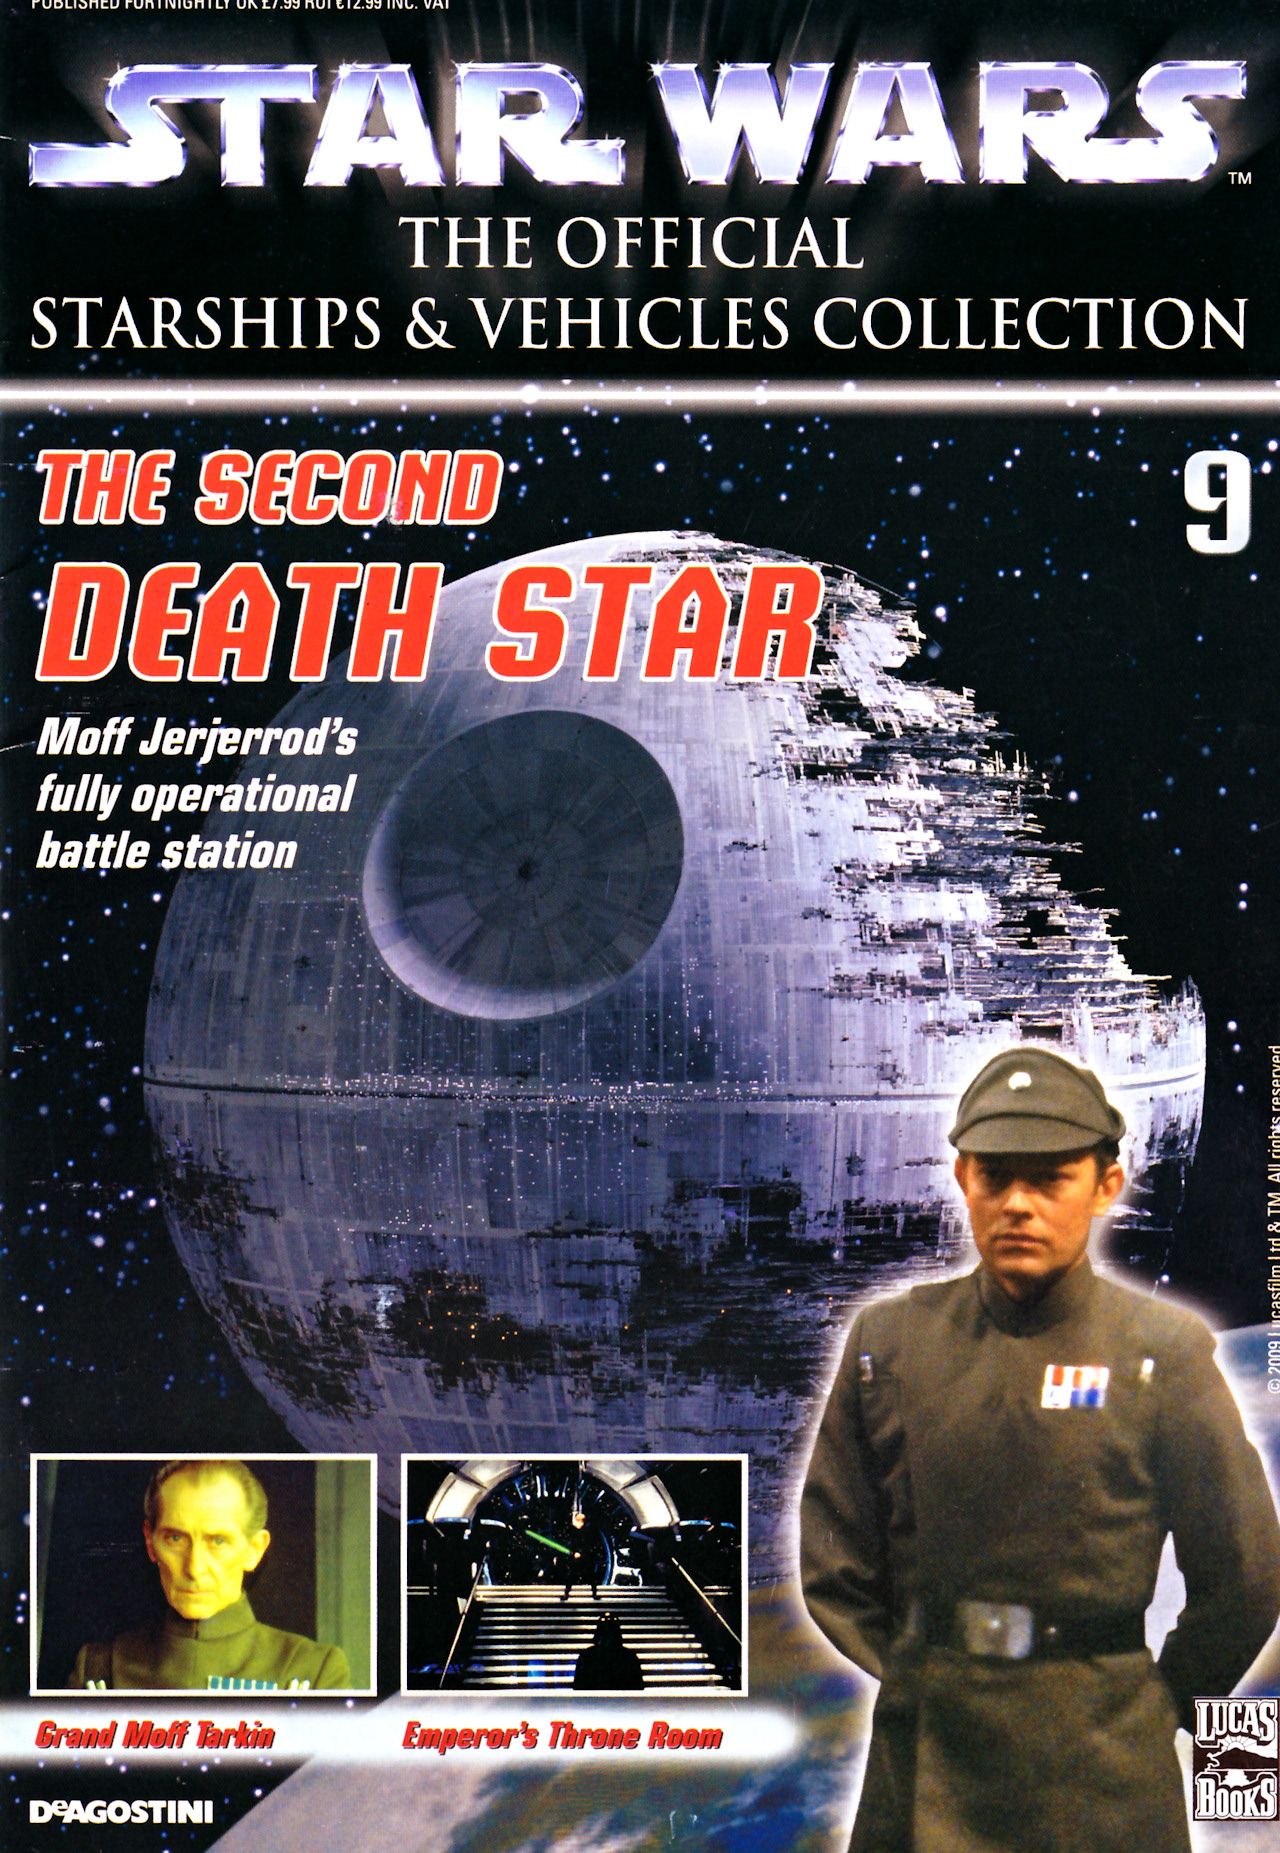 Star Wars: The Official Starships & Vehicles Collection 9